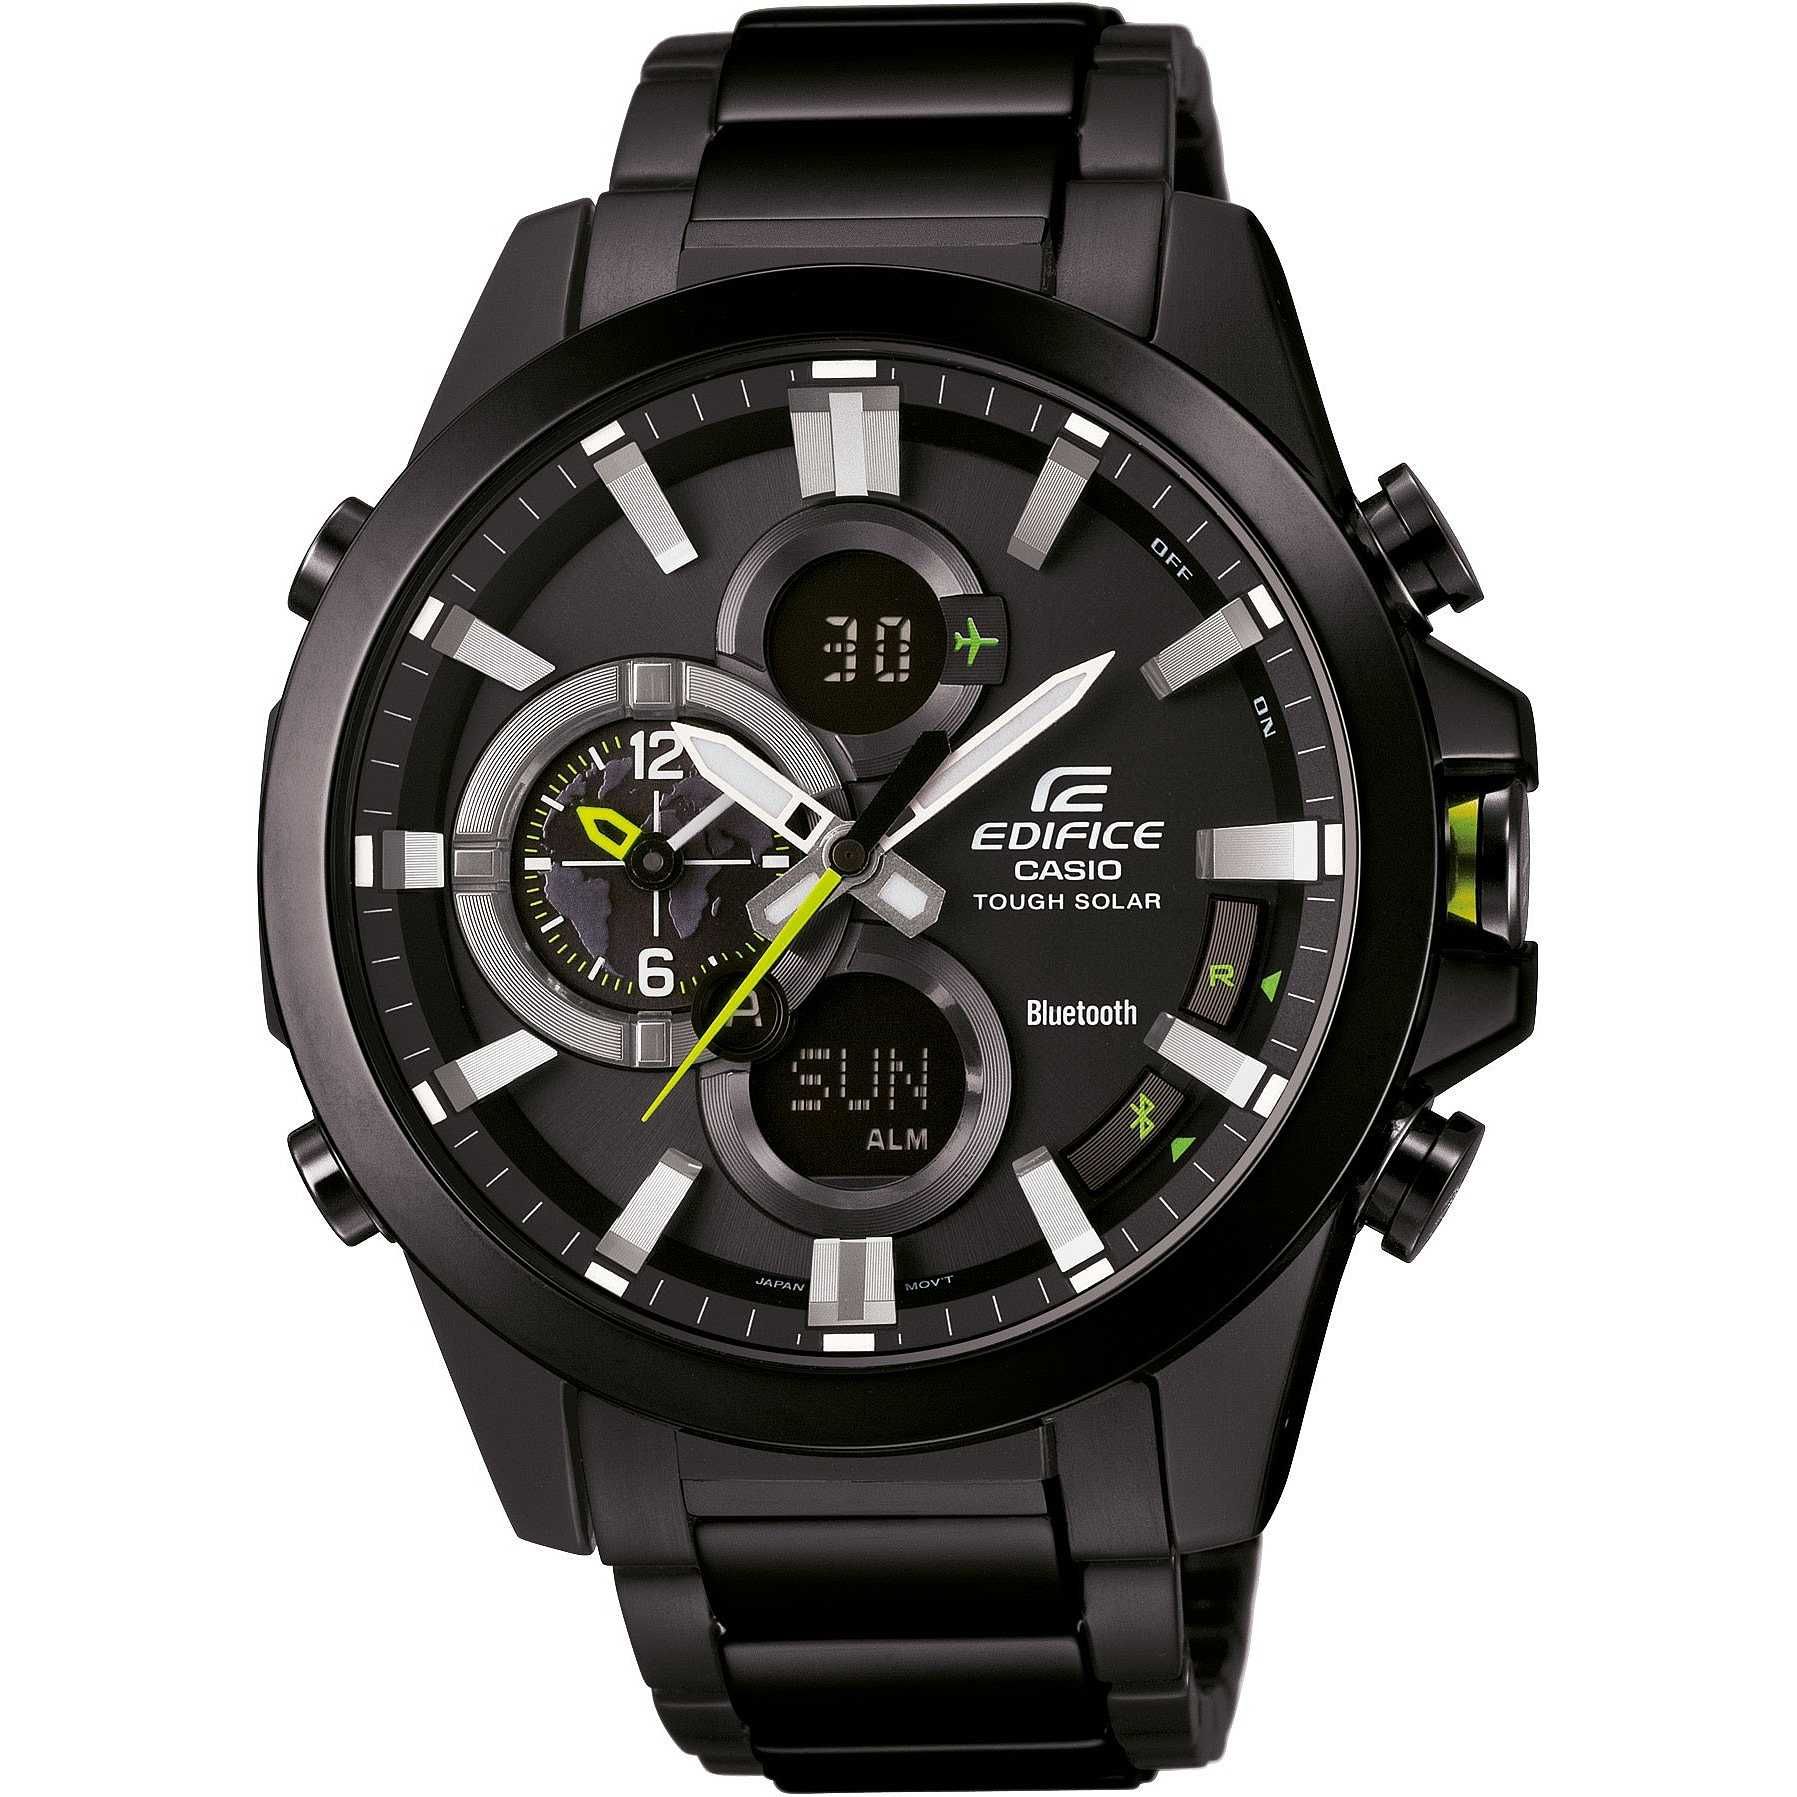 This Casio Edifice Analogue-Digital Watch for Men is the perfect timepiece to wear or to gift. It's Black 44 mm Round case combined with the comfortable Black Stainless steel will ensure you enjoy this stunning timepiece without any compromise. Operated by a high quality Quartz movement and water resistant to 10 bars, your watch will keep ticking. This smartwatch connects wireless to your smartphone through bluetooth, this watch glows in the dark and has a Dual time -The watch has a Calendar function: Day-Date, Bluetooth, Solar Powered, Stop Watch, Countdown, Alarm High quality 21 cm length and 21 mm width Black Stainless steel strap with a Fold over with push button clasp Case diameter: 44 mm,case thickness: 15 mm, case colour: Black and dial colour: Black